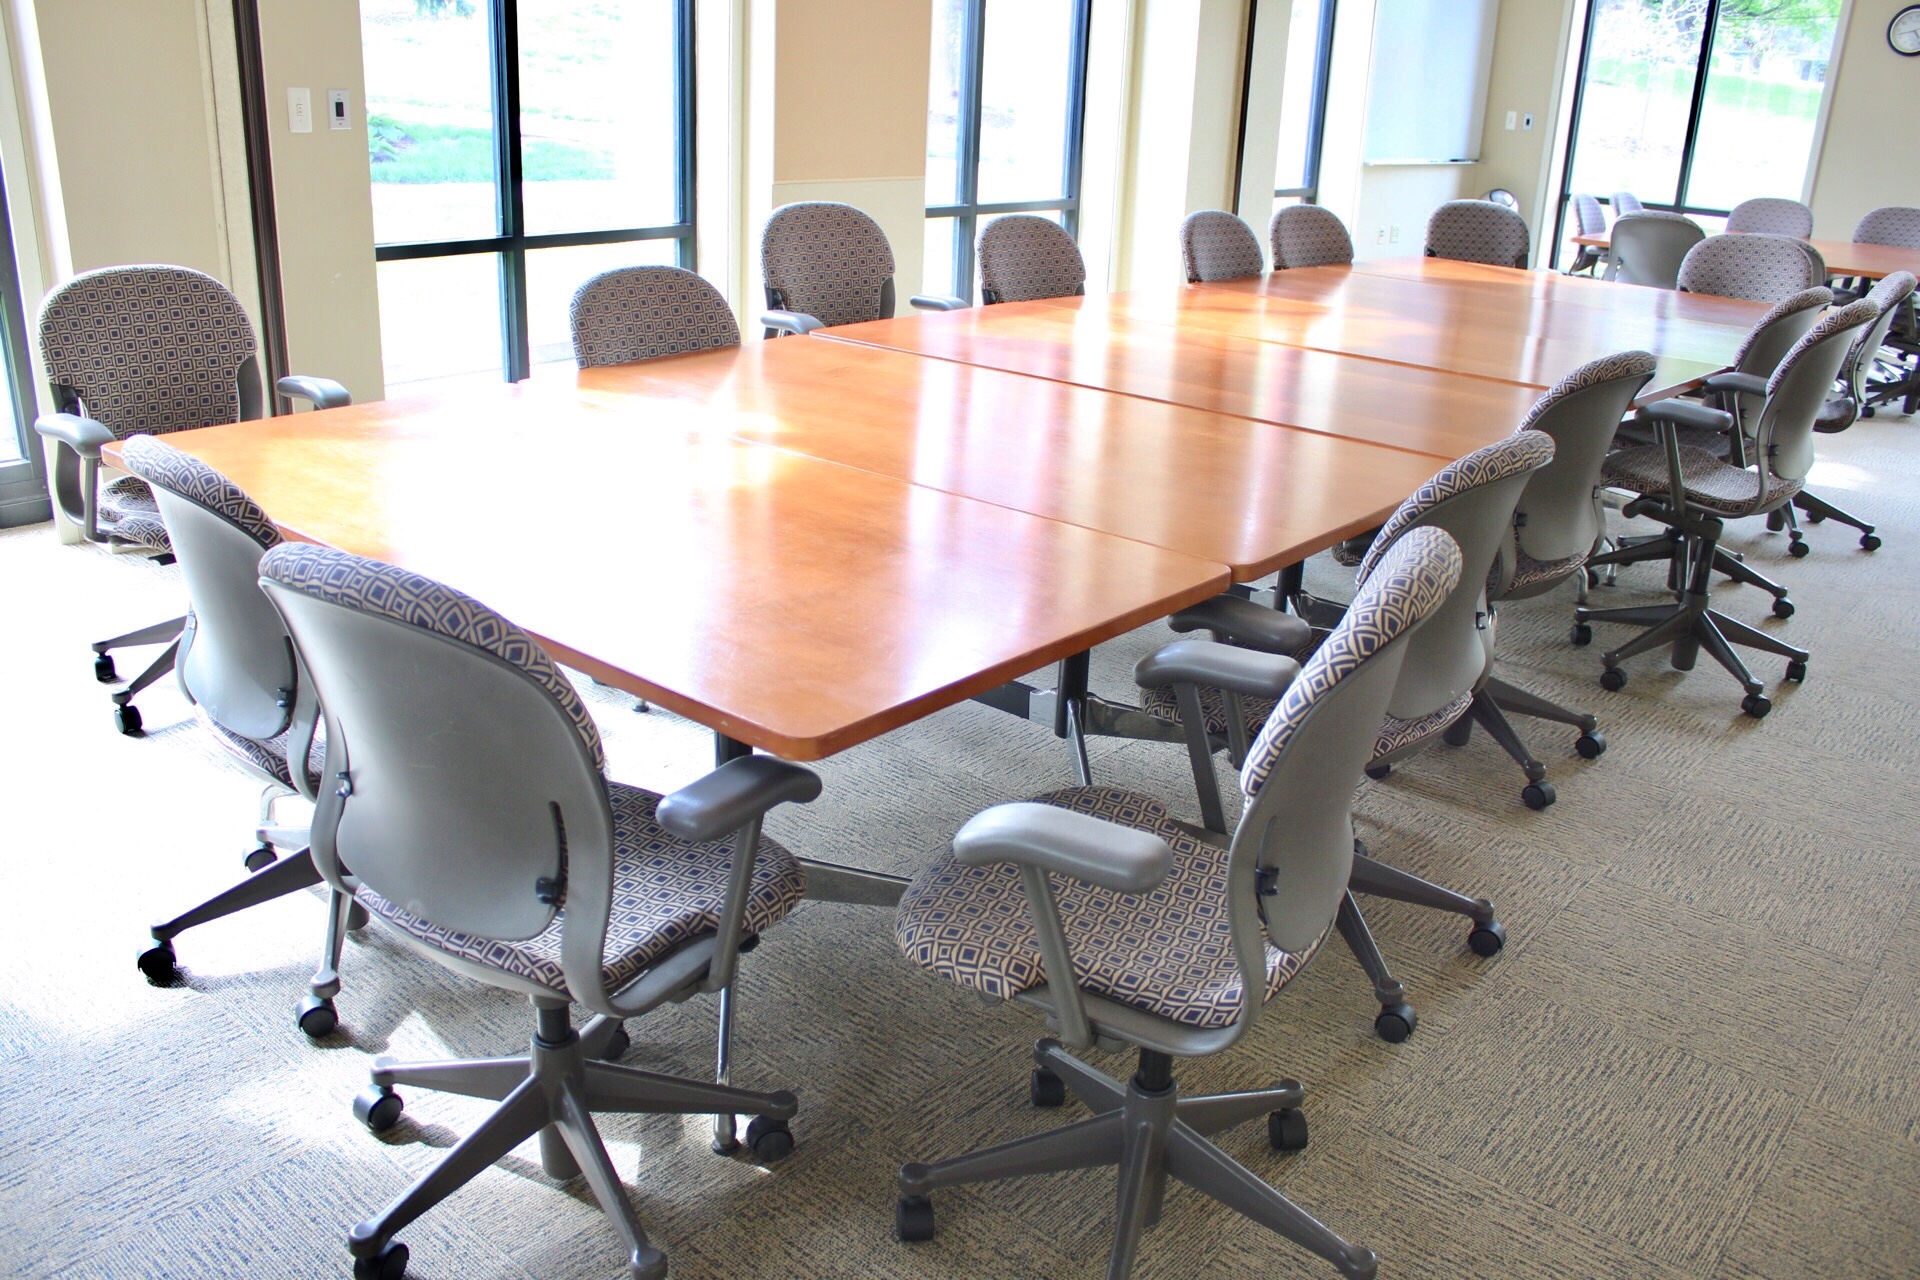 Tables and chairs in the CATS conference room.